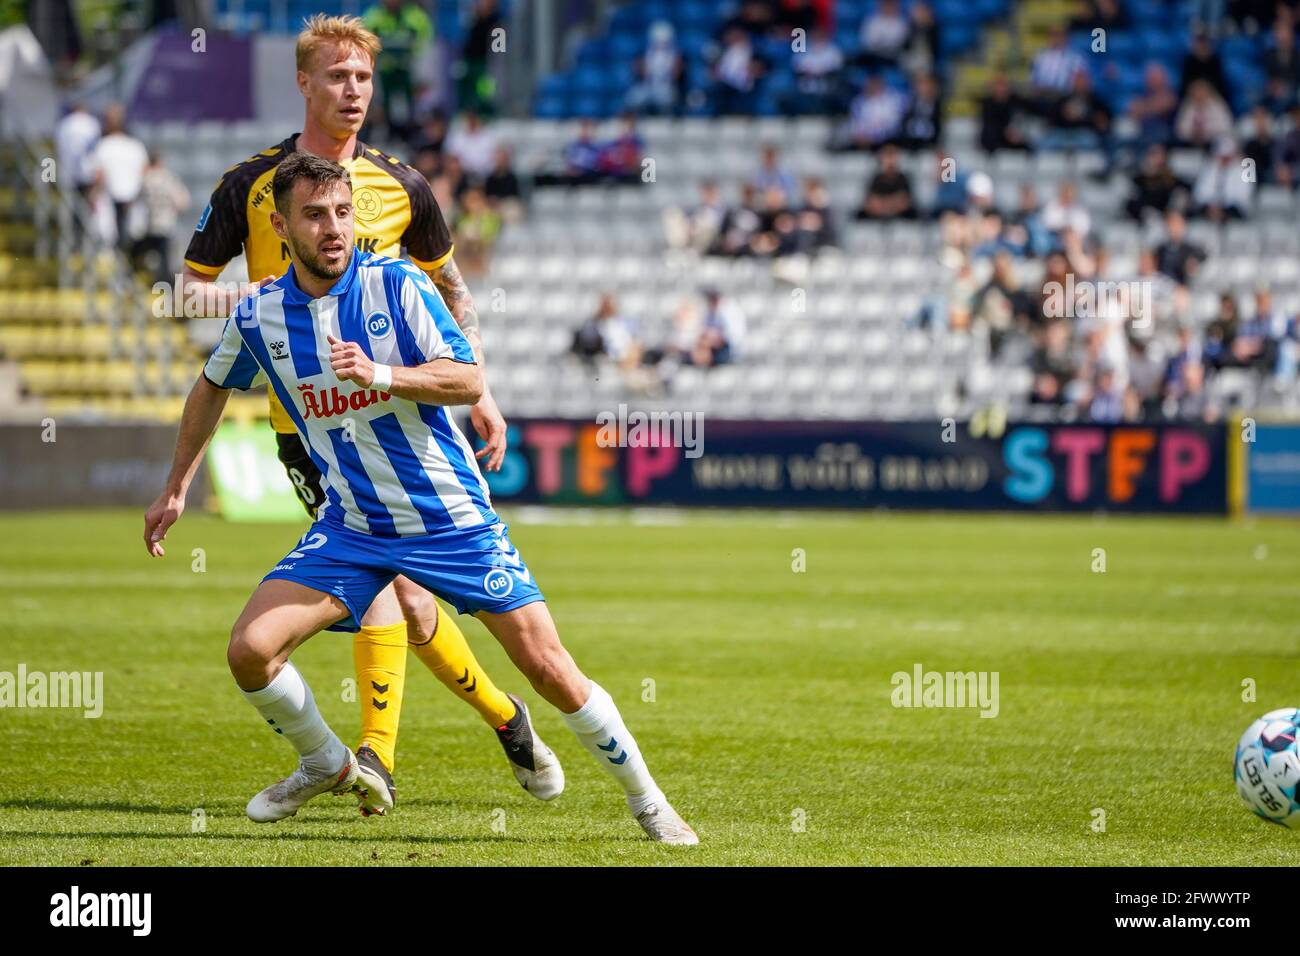 Denmark. 24th May, 2021. Bashkim Kadrii (12) of seen during the 3F Superliga match between Odense Boldklub and AC Horsens at Nature Energy Park in Odense. (Photo Credit: Gonzales